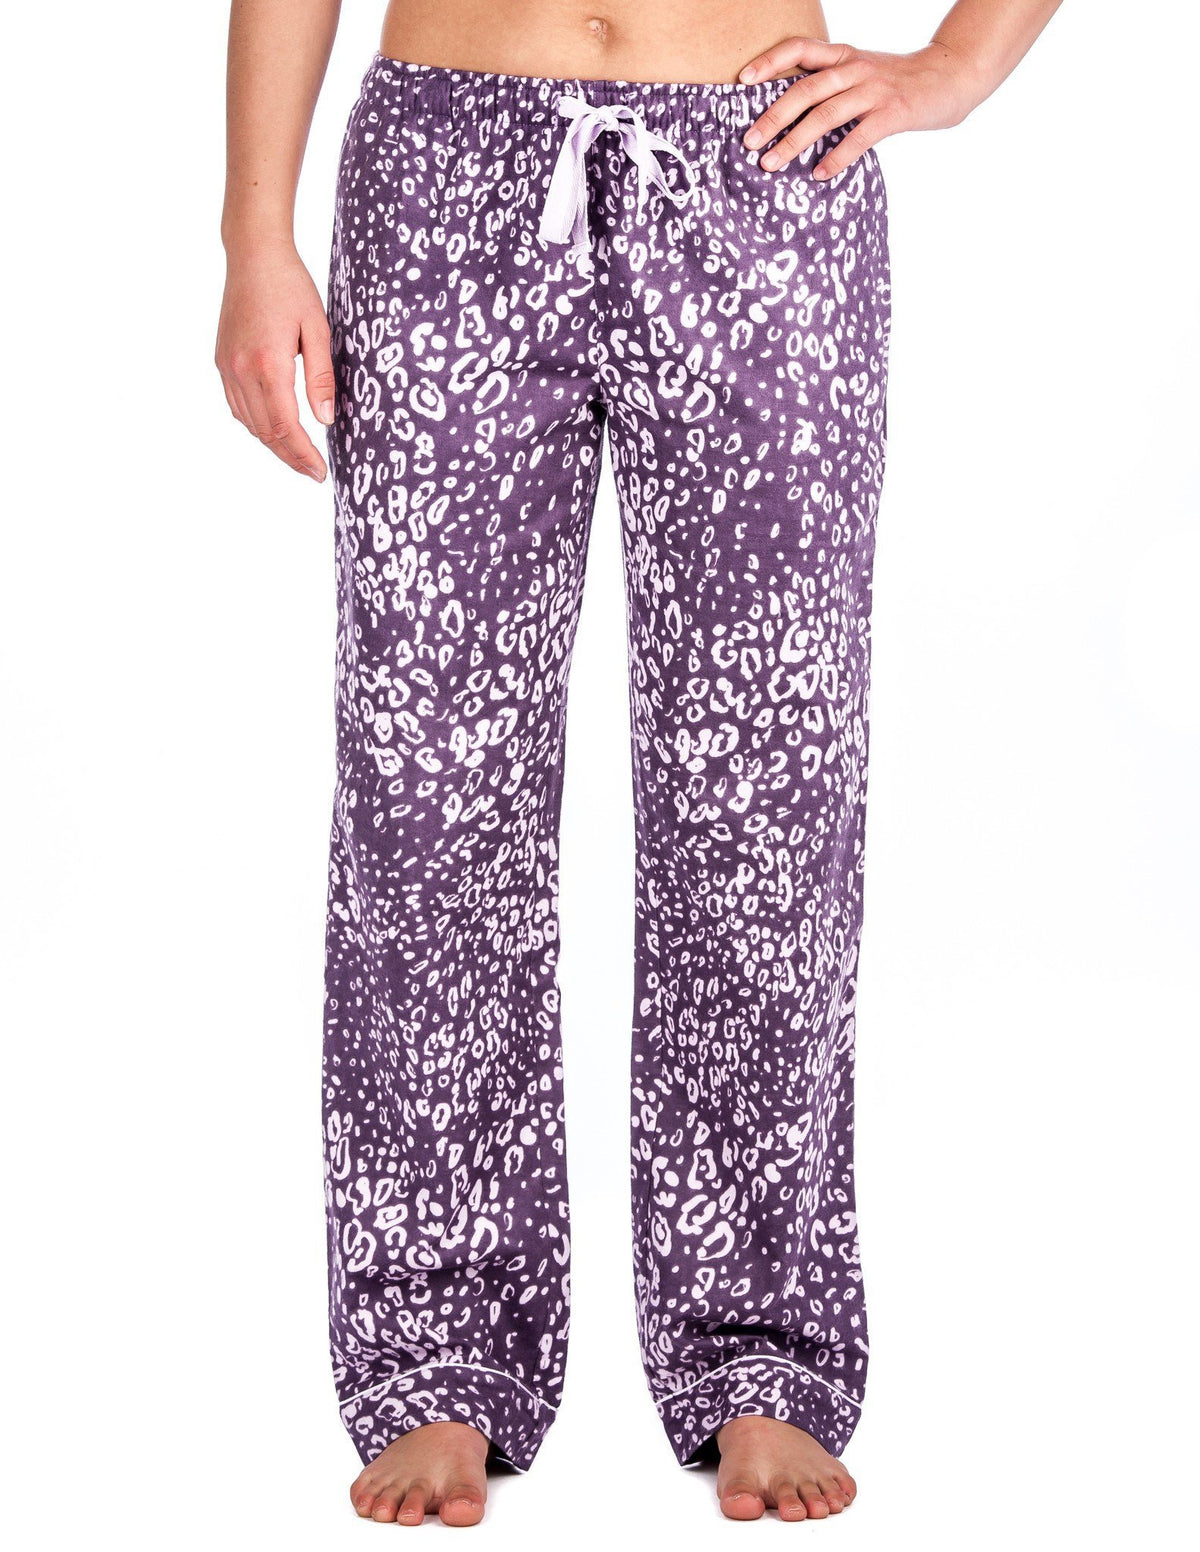 Relaxed Fit Womens 100% Cotton Flannel Lounge Pants - Leopard Purple